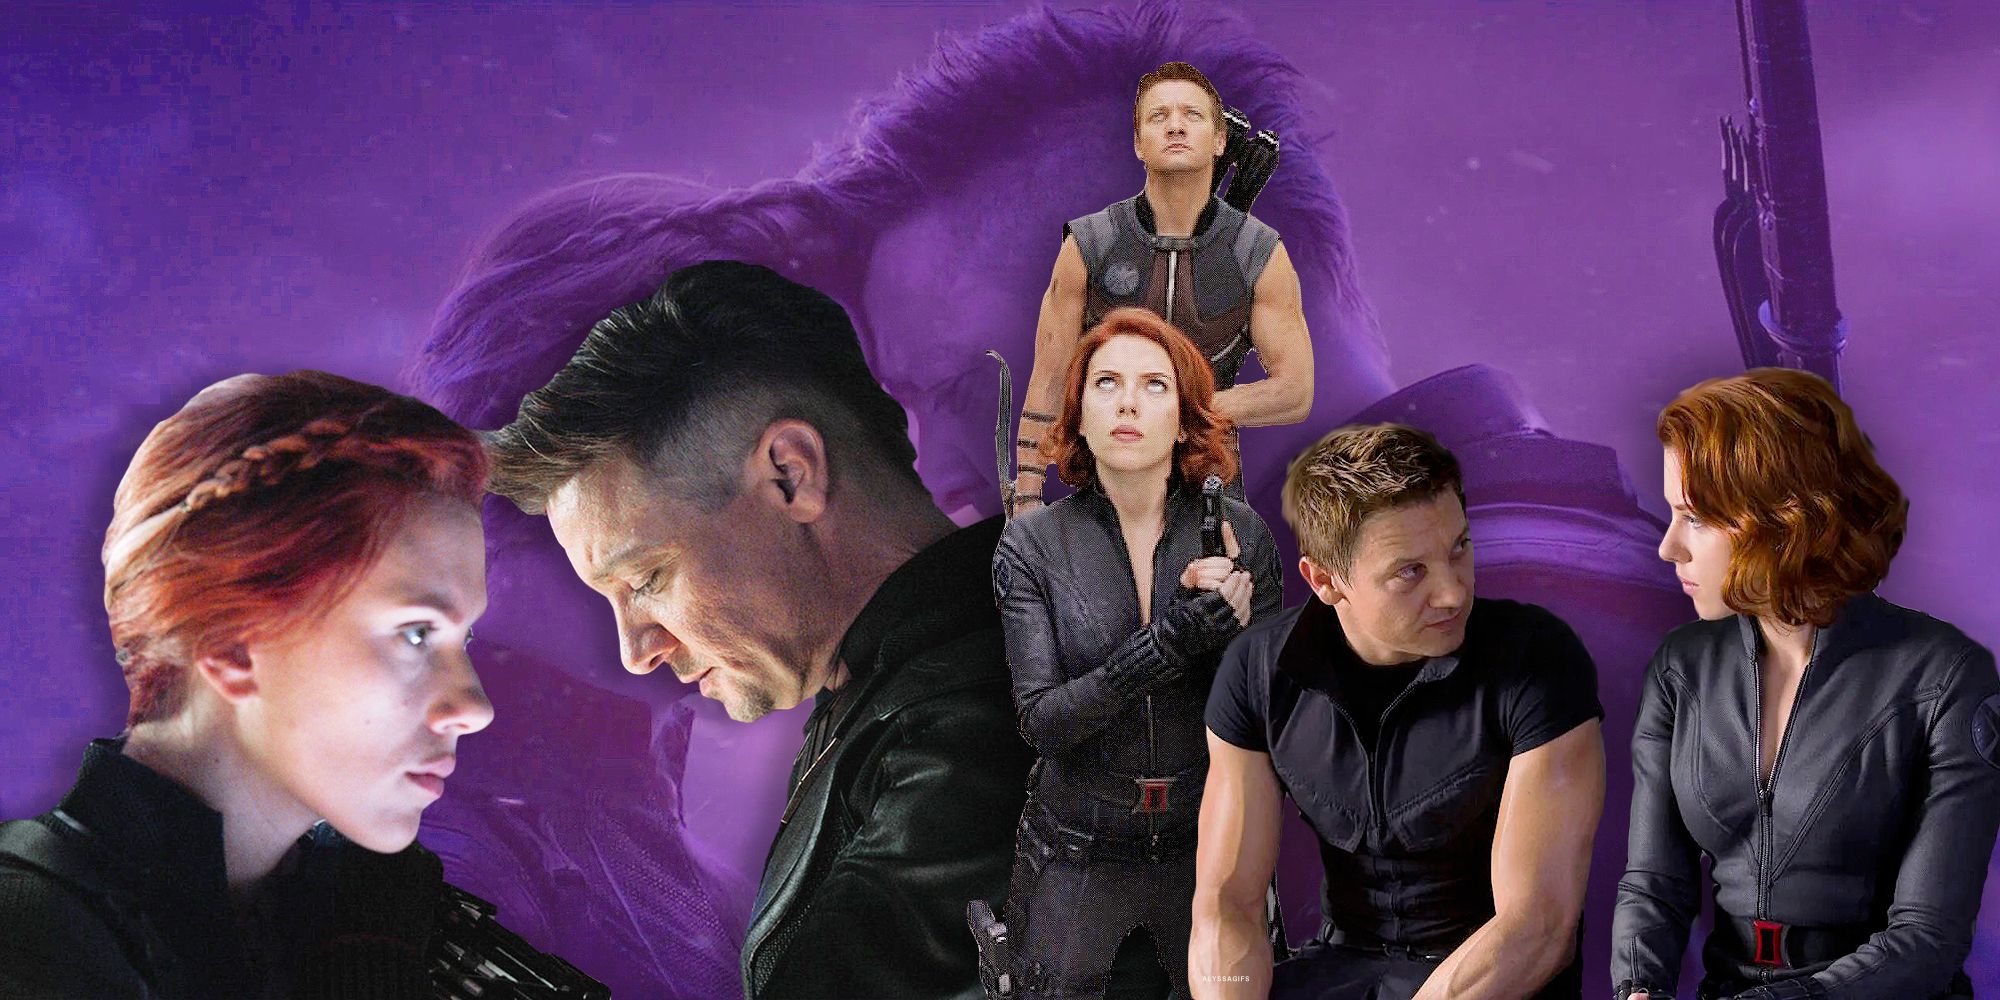 Scarlett Johansson and Jeremy Renner as Black Widow and Hawkeye Feature Image